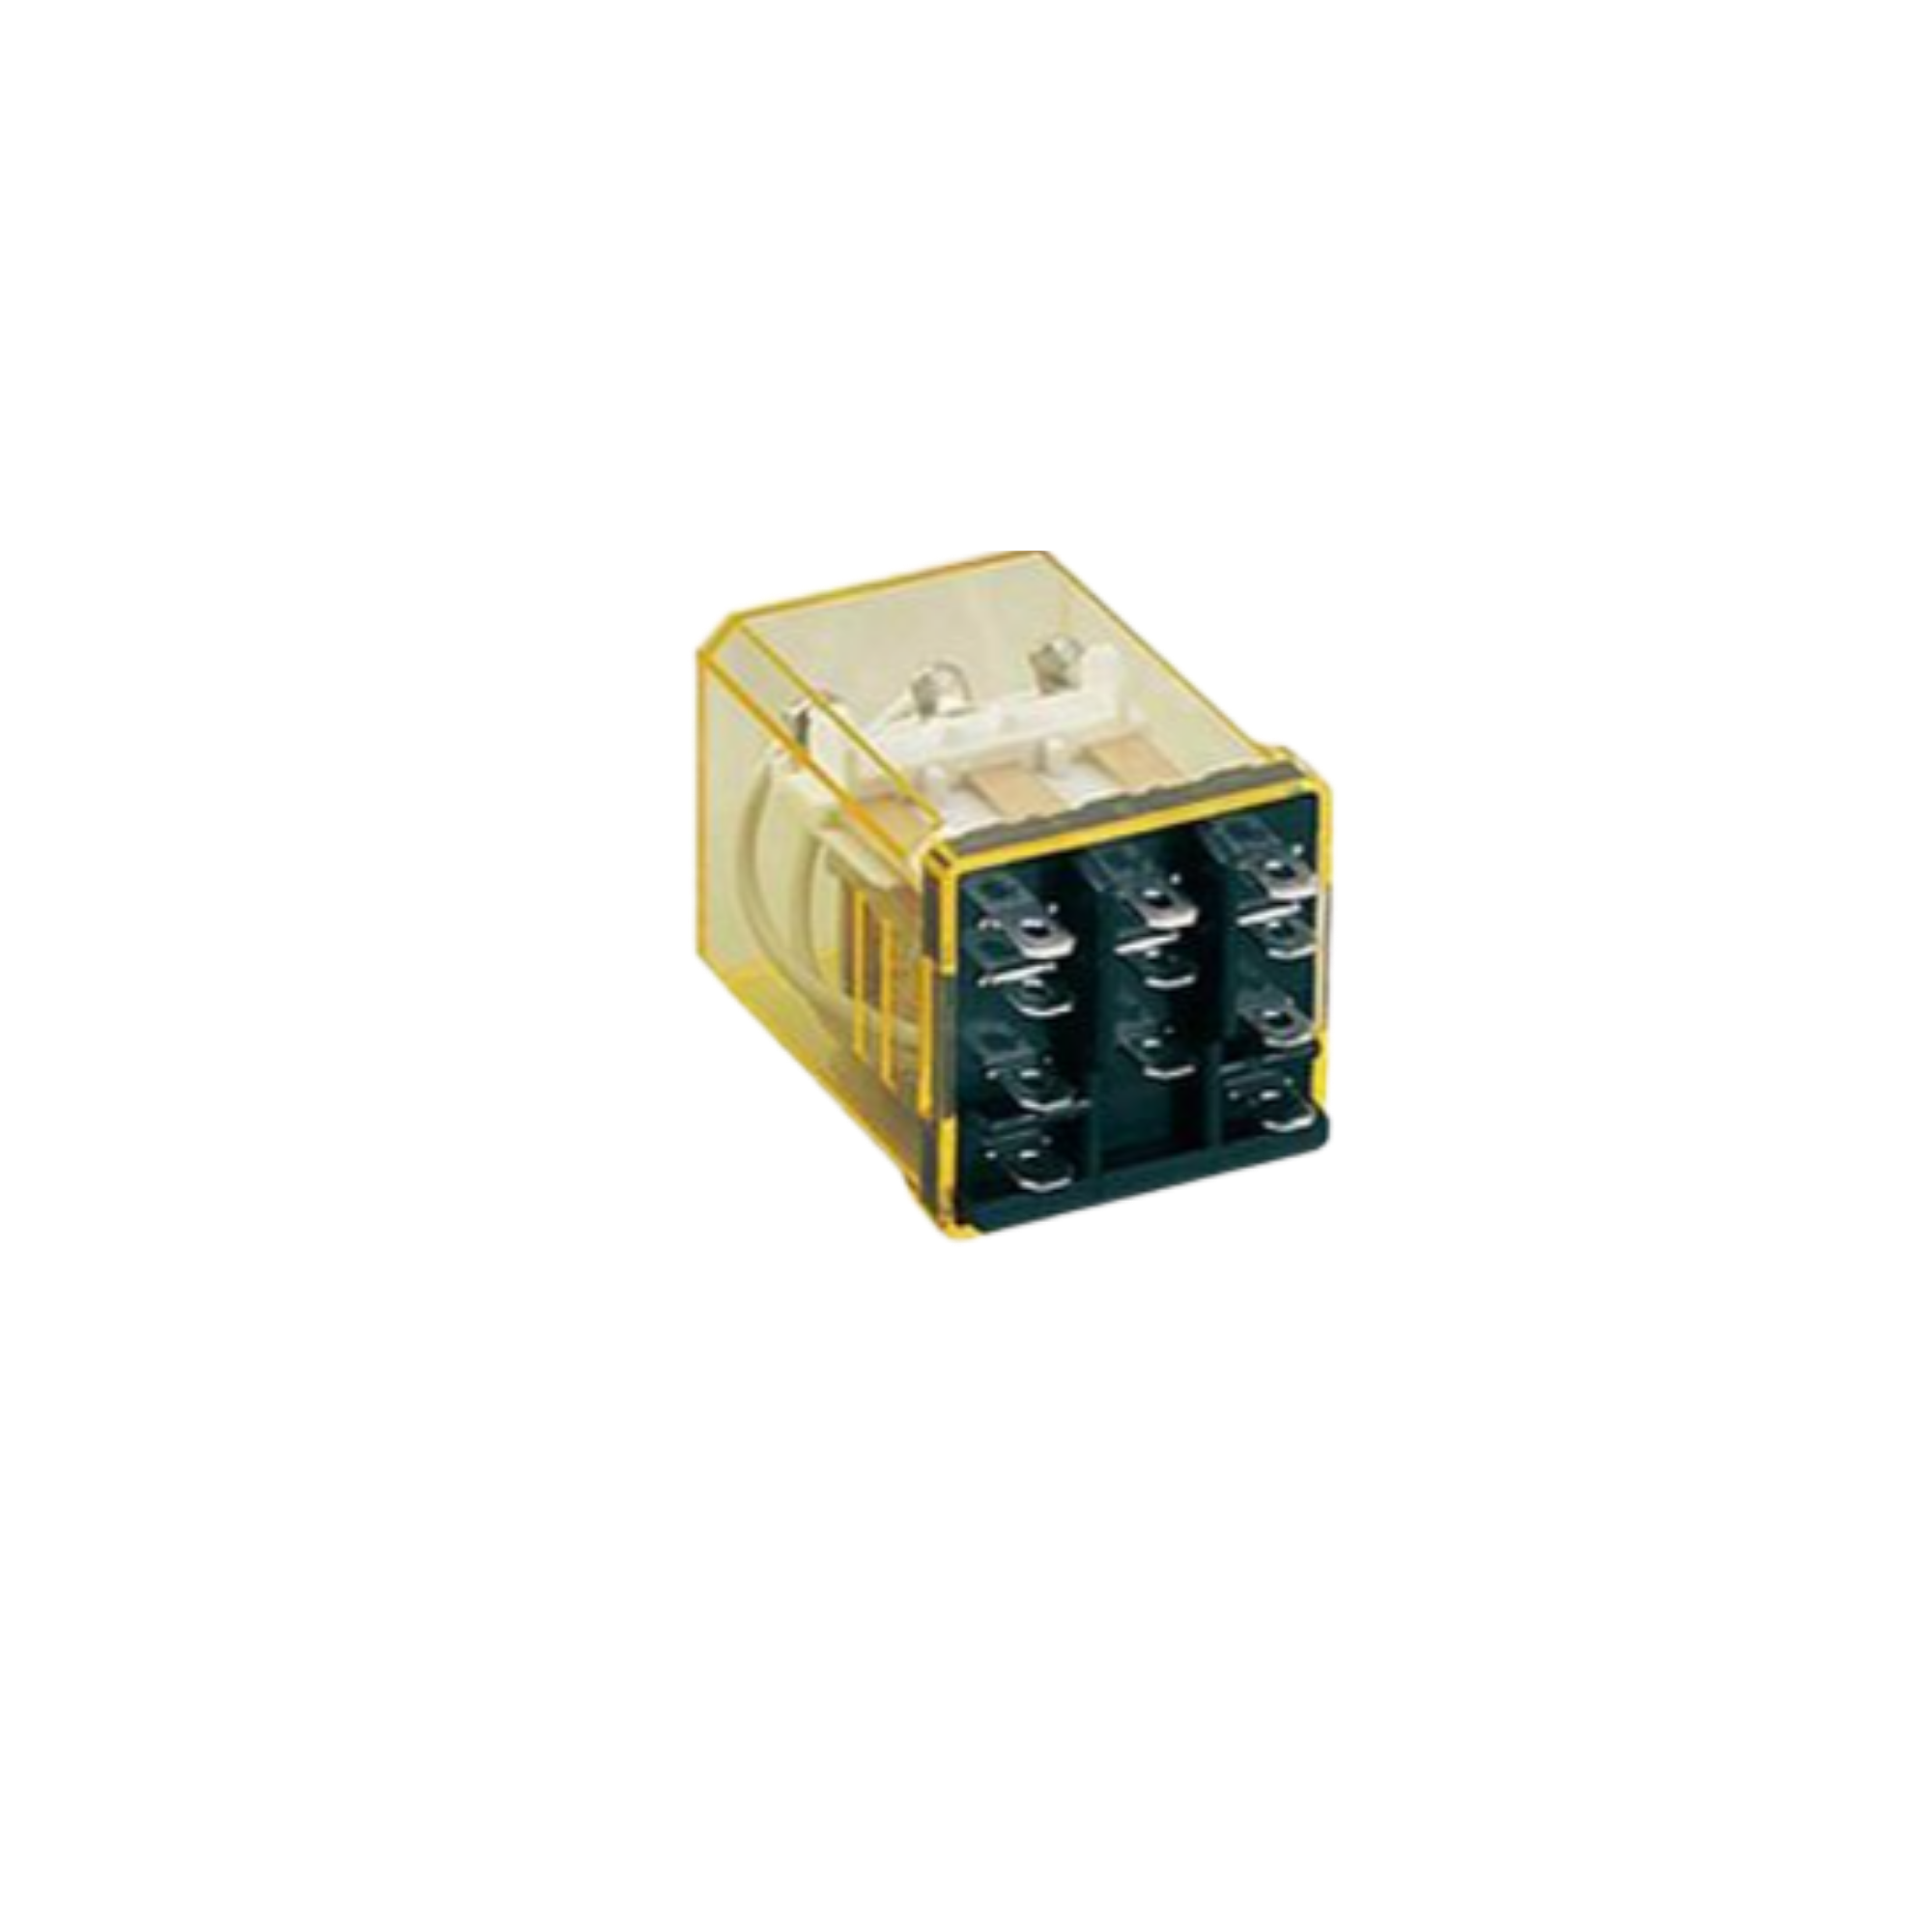 bottom view of a relay unit with a clear yellow housing toward the back and metal tabs at the front